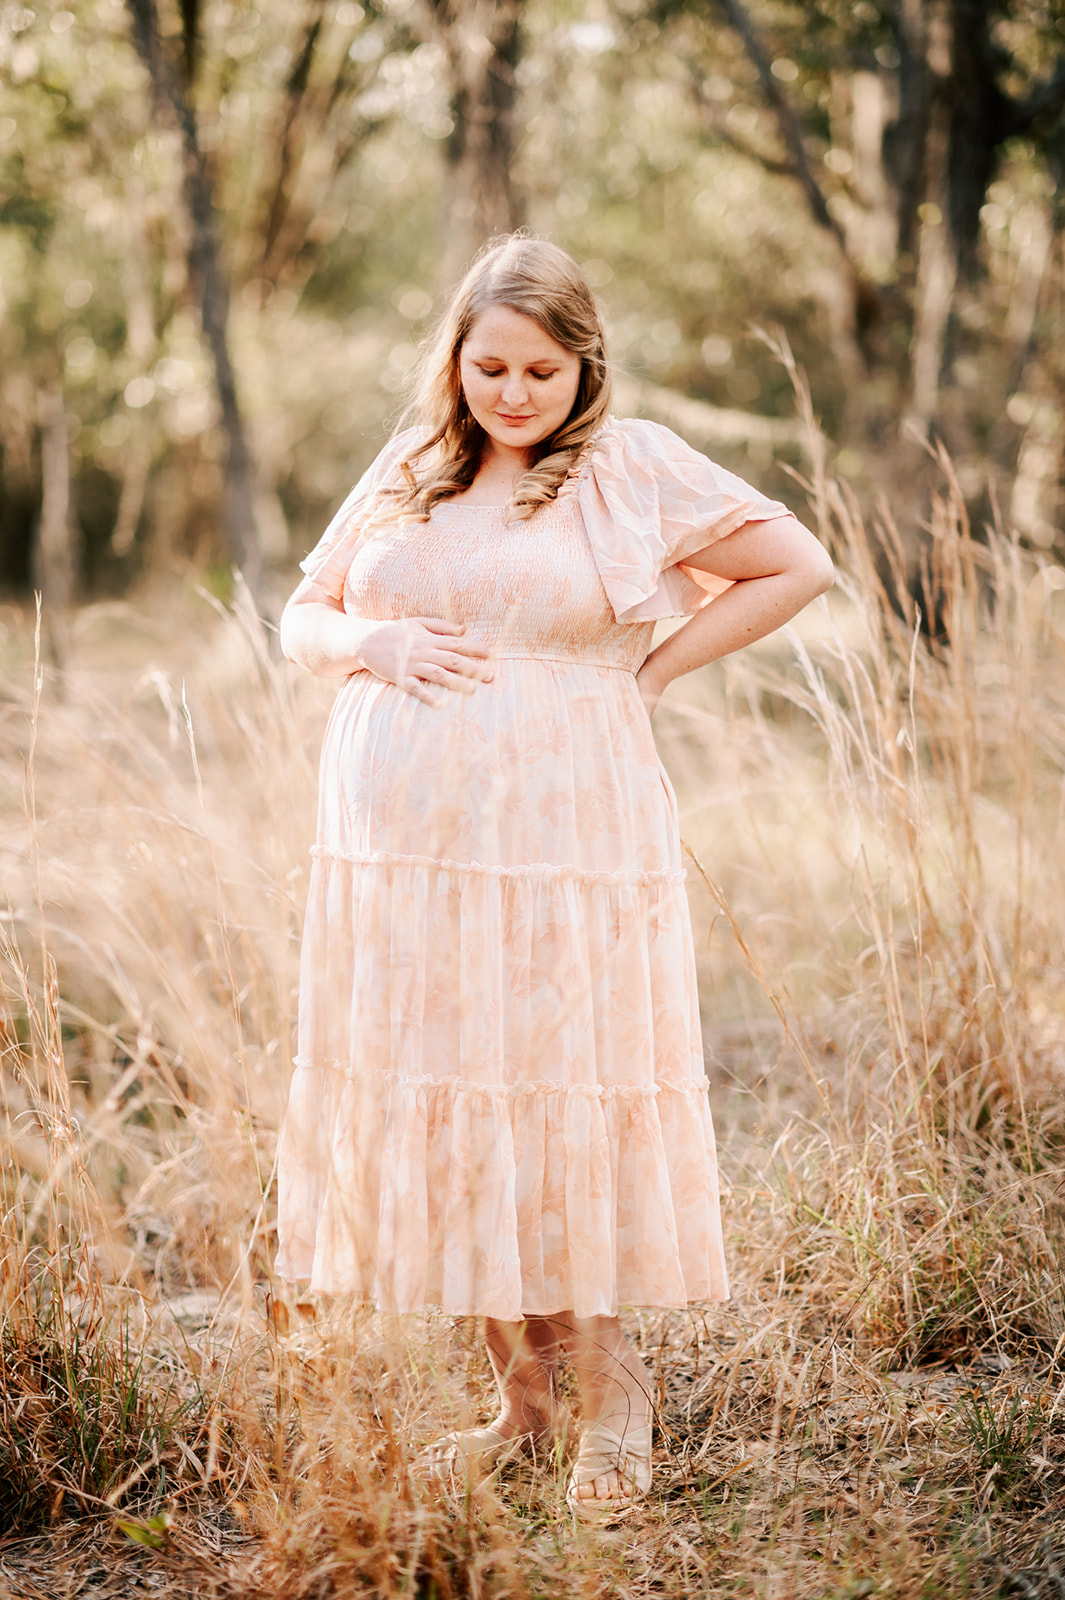 A pregnant woman stands in a field of golden grass while looking down at her bump in a pink floral dress